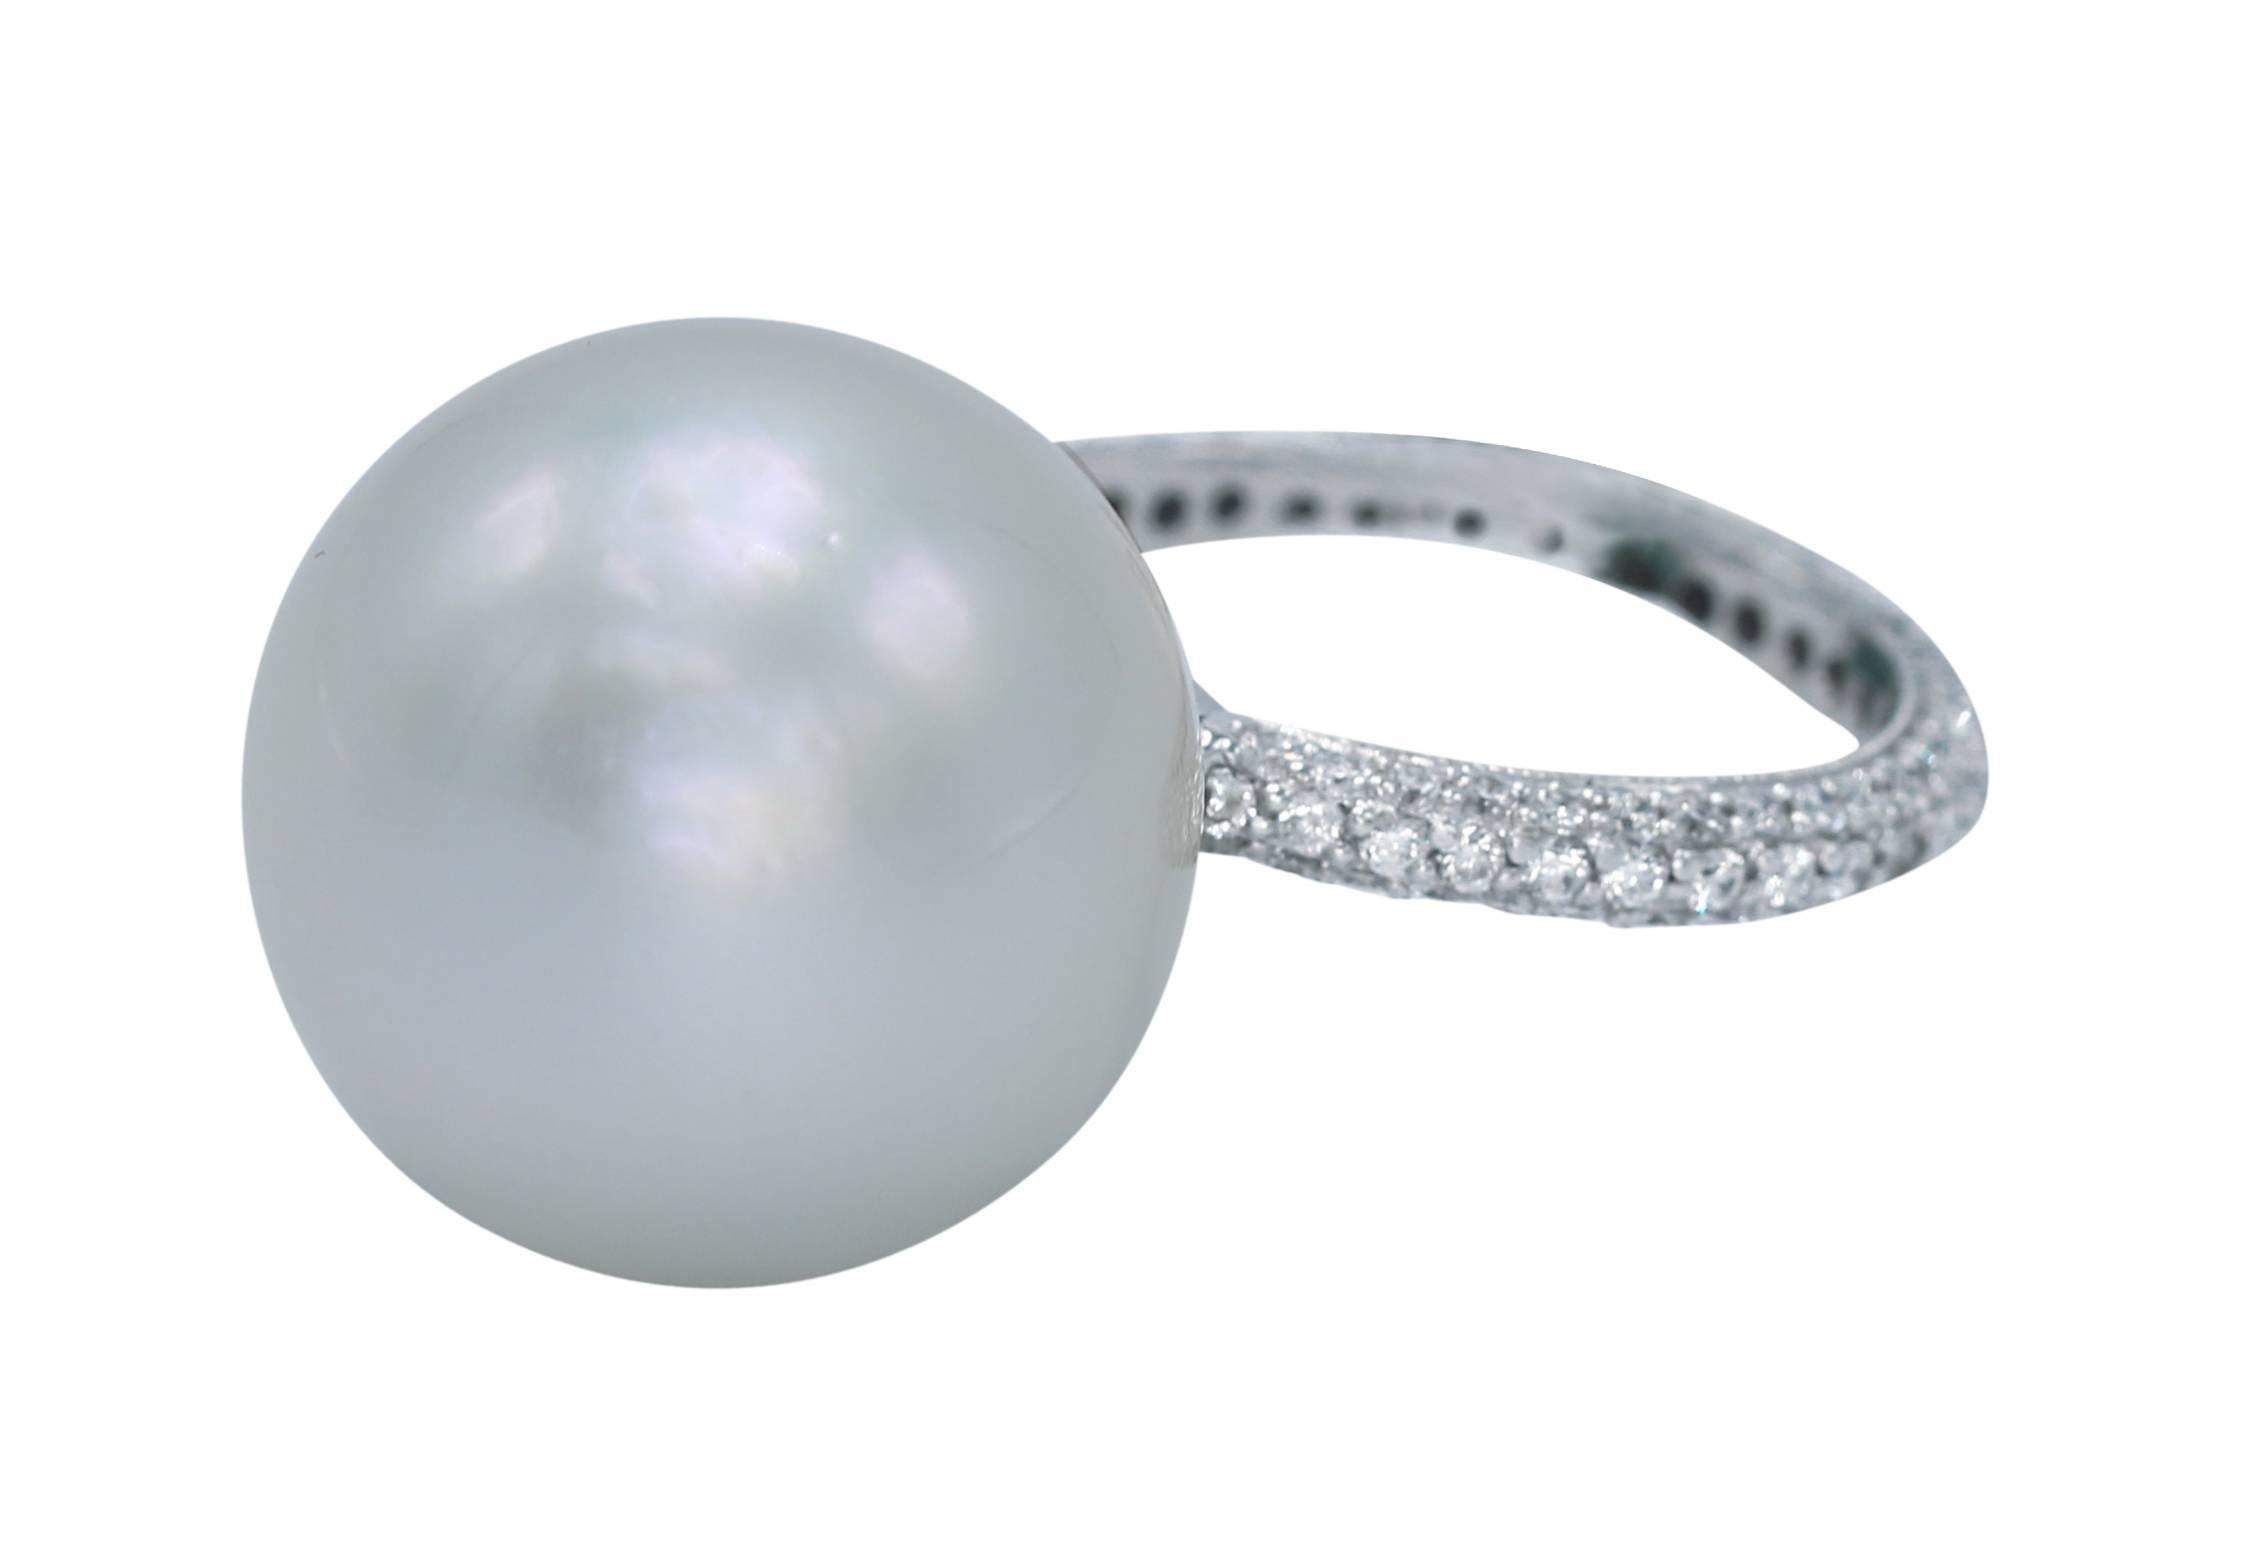 A simple yet elegant south sea pearl and diamond cocktail ring, set with a large south sea cultured pearl measuring 18.0 mm., the shank set throughout with numerous round diamonds weighing approximately 1.50 carats, mounted in 18 karat white gold,